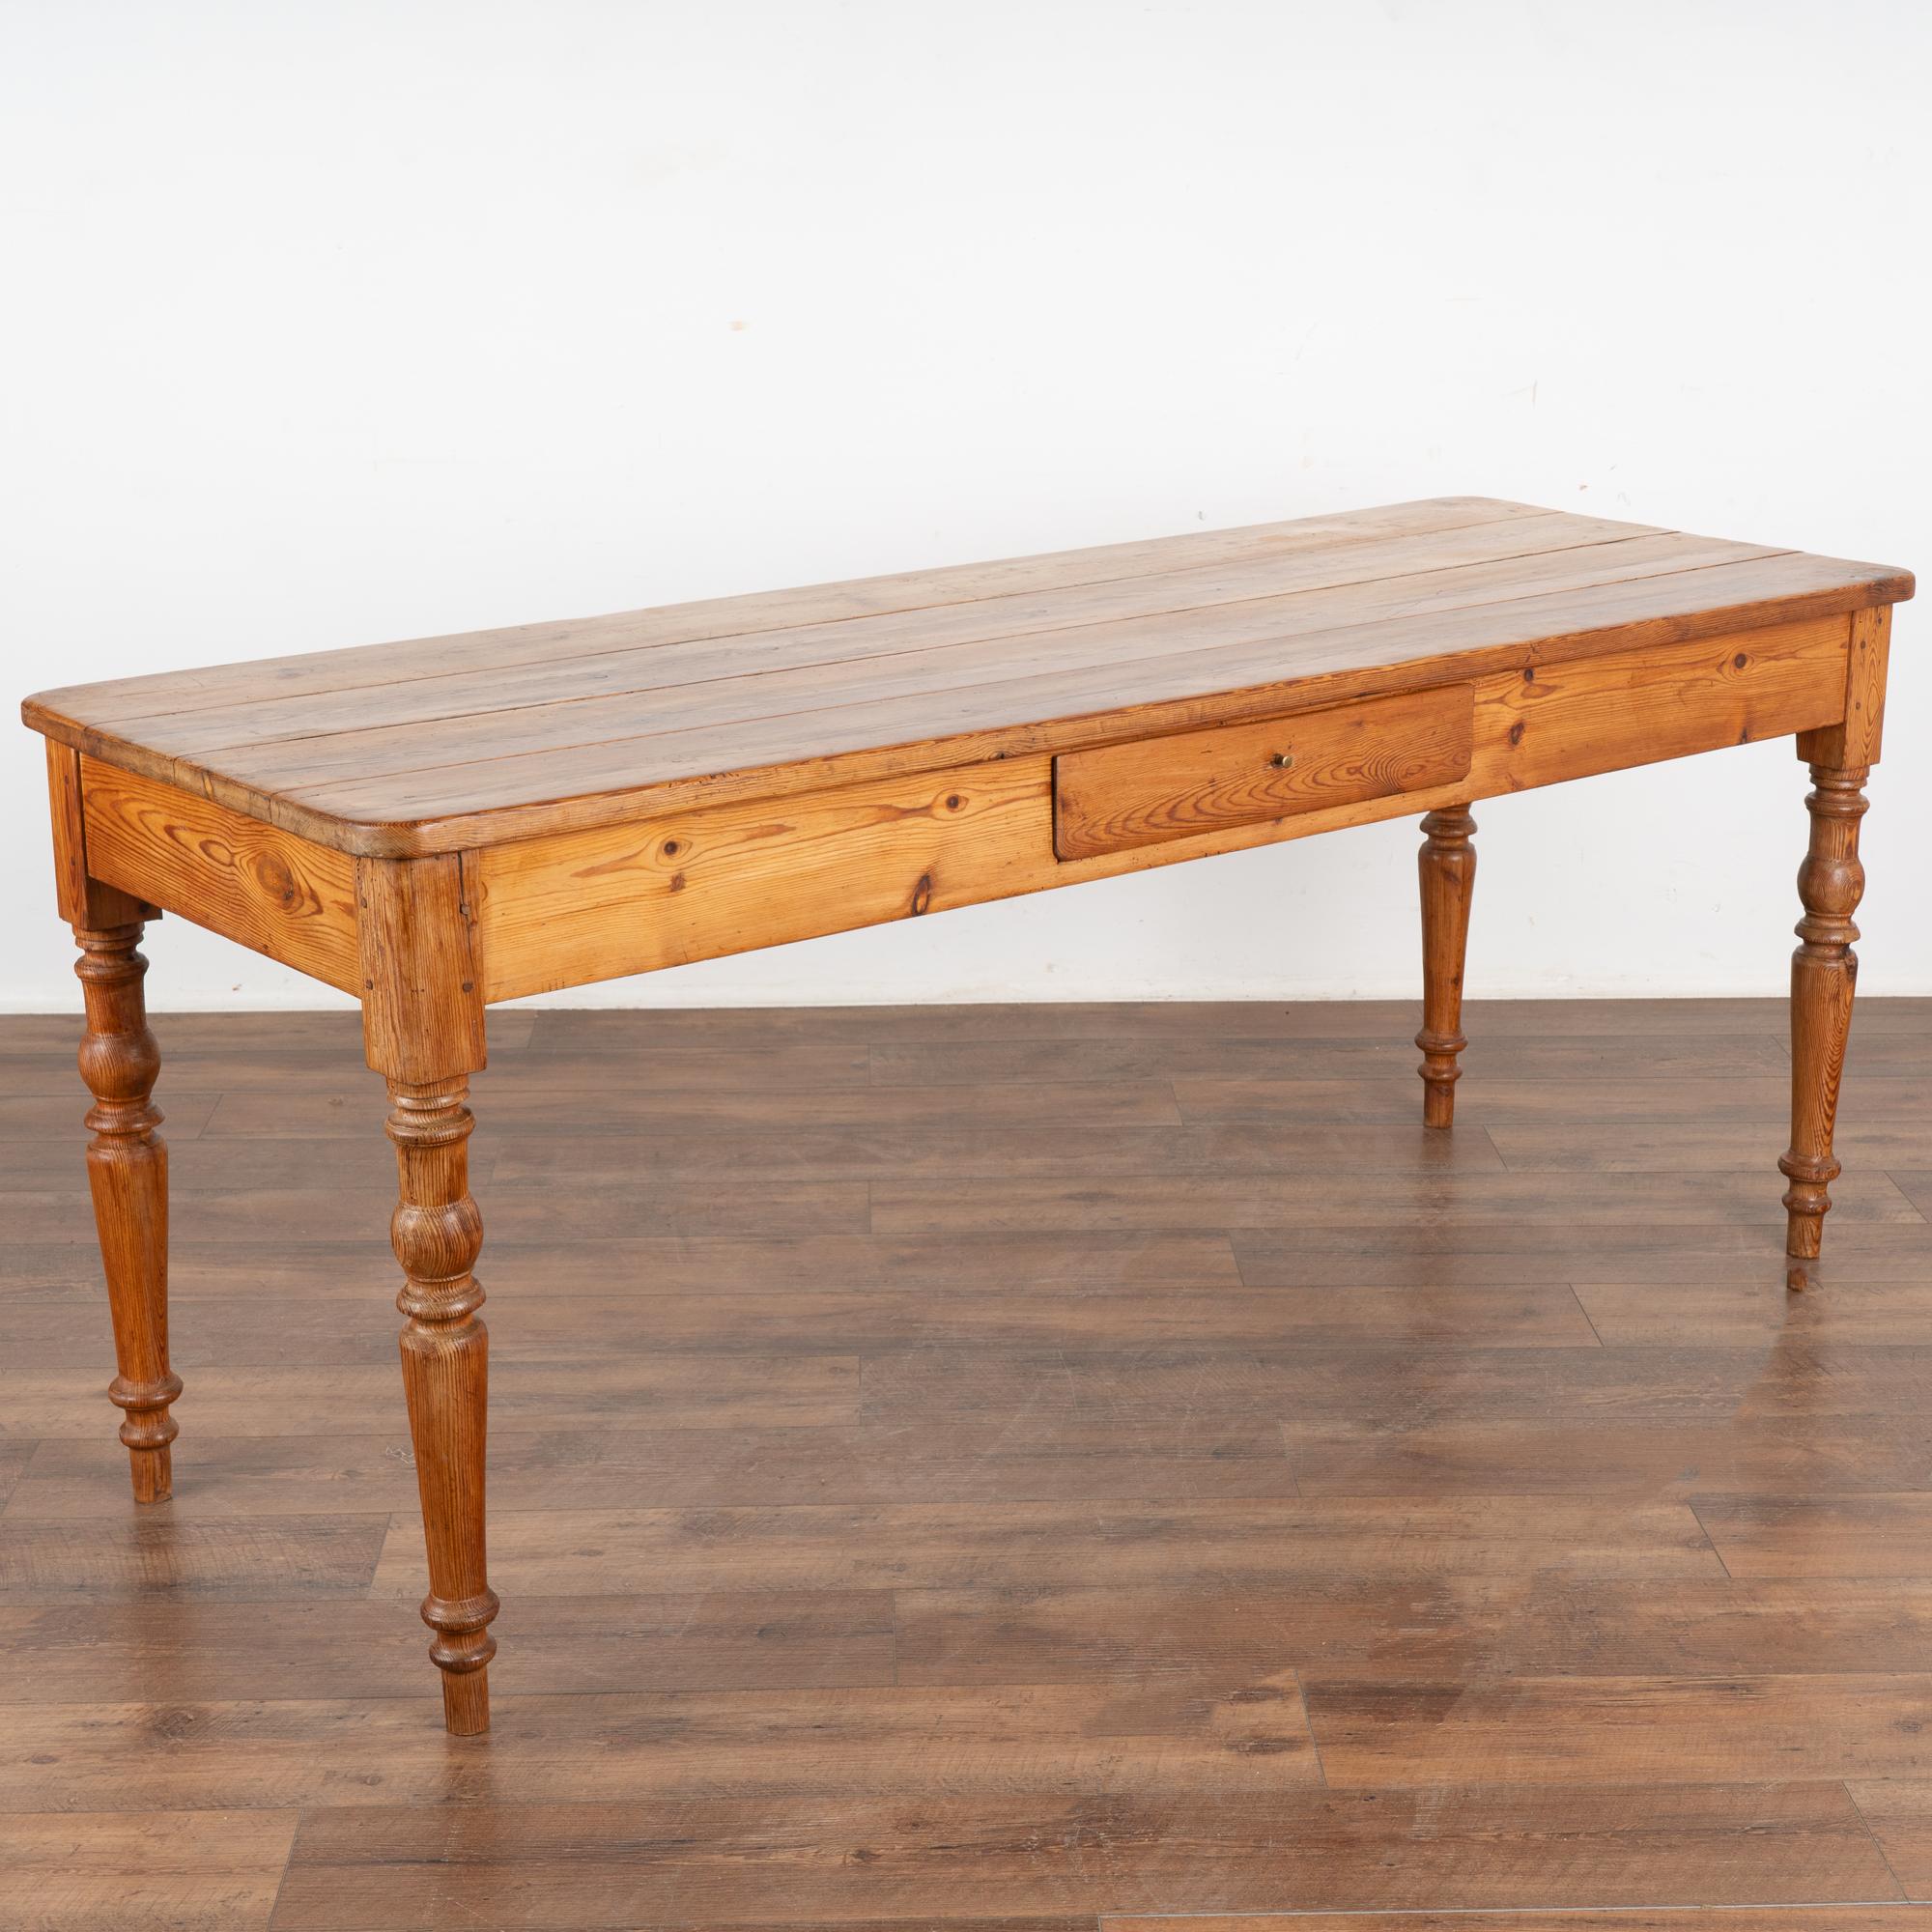 The beauty of this pine farm table comes from the warm aged pine and the lovely turned legs.
It may have originally served as a kitchen work table in a country manor house; note the scratches, dings, stains and age related separation of planks in